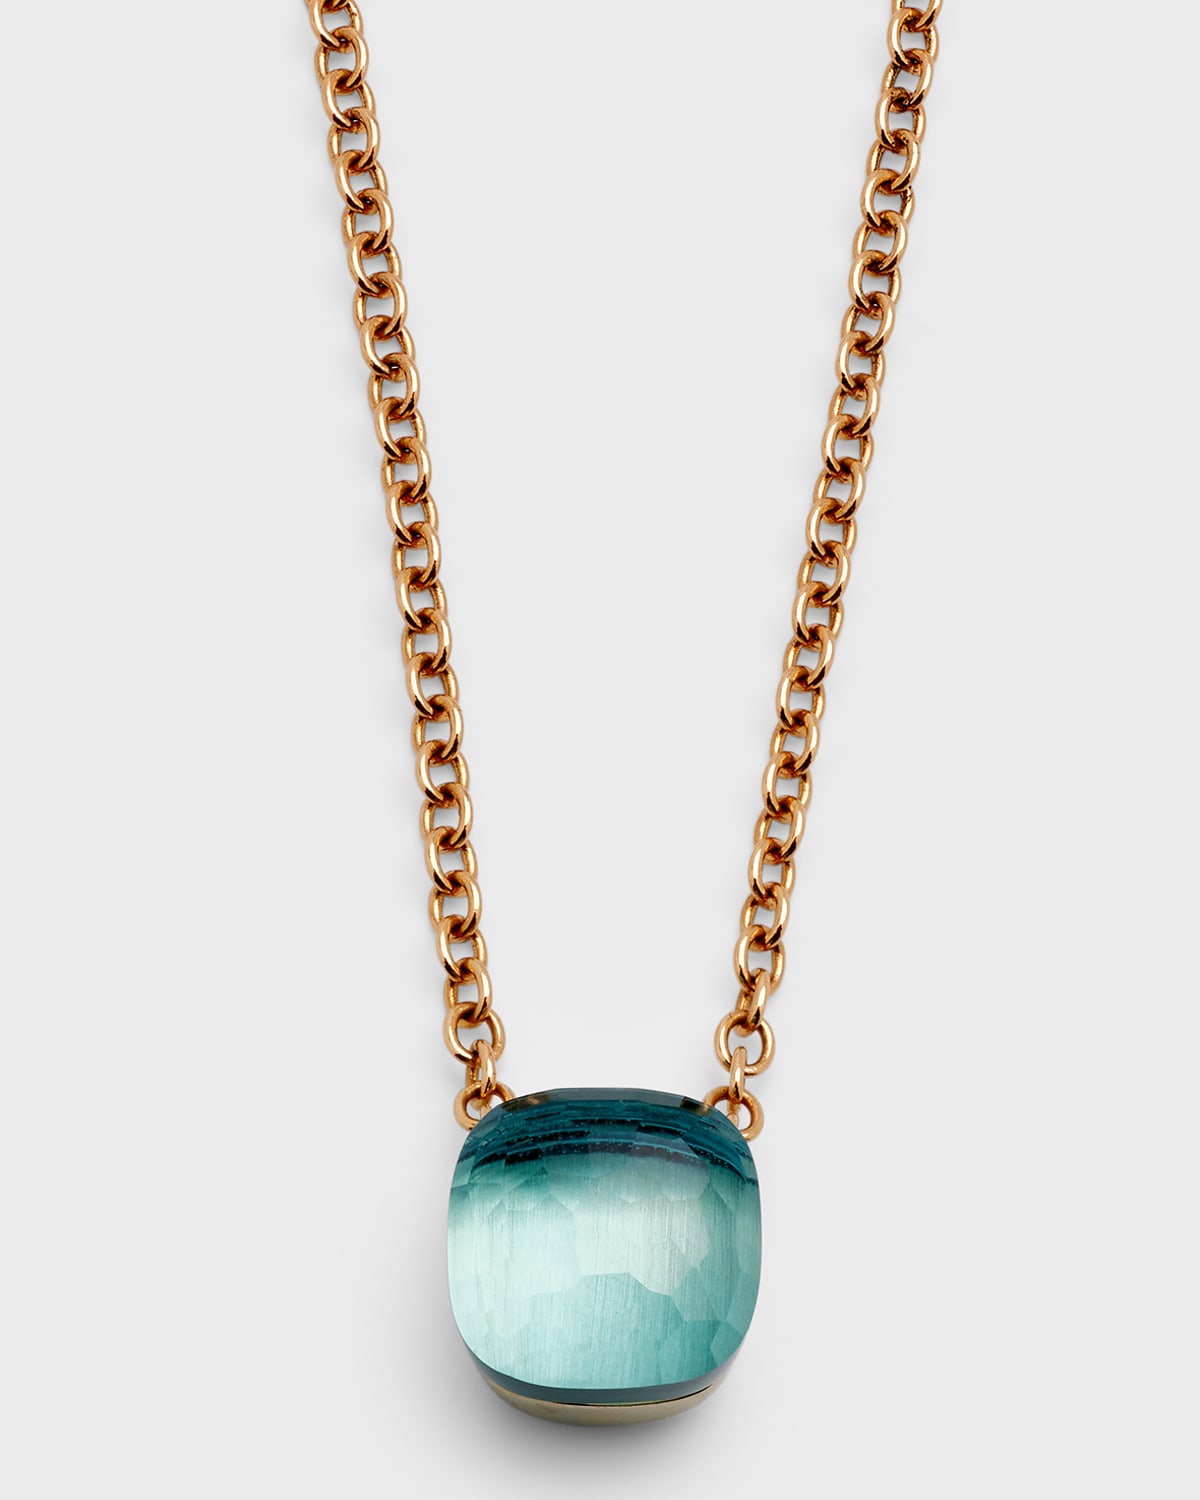 Nudo 18K White and Rose Gold Necklace with Blue Topaz